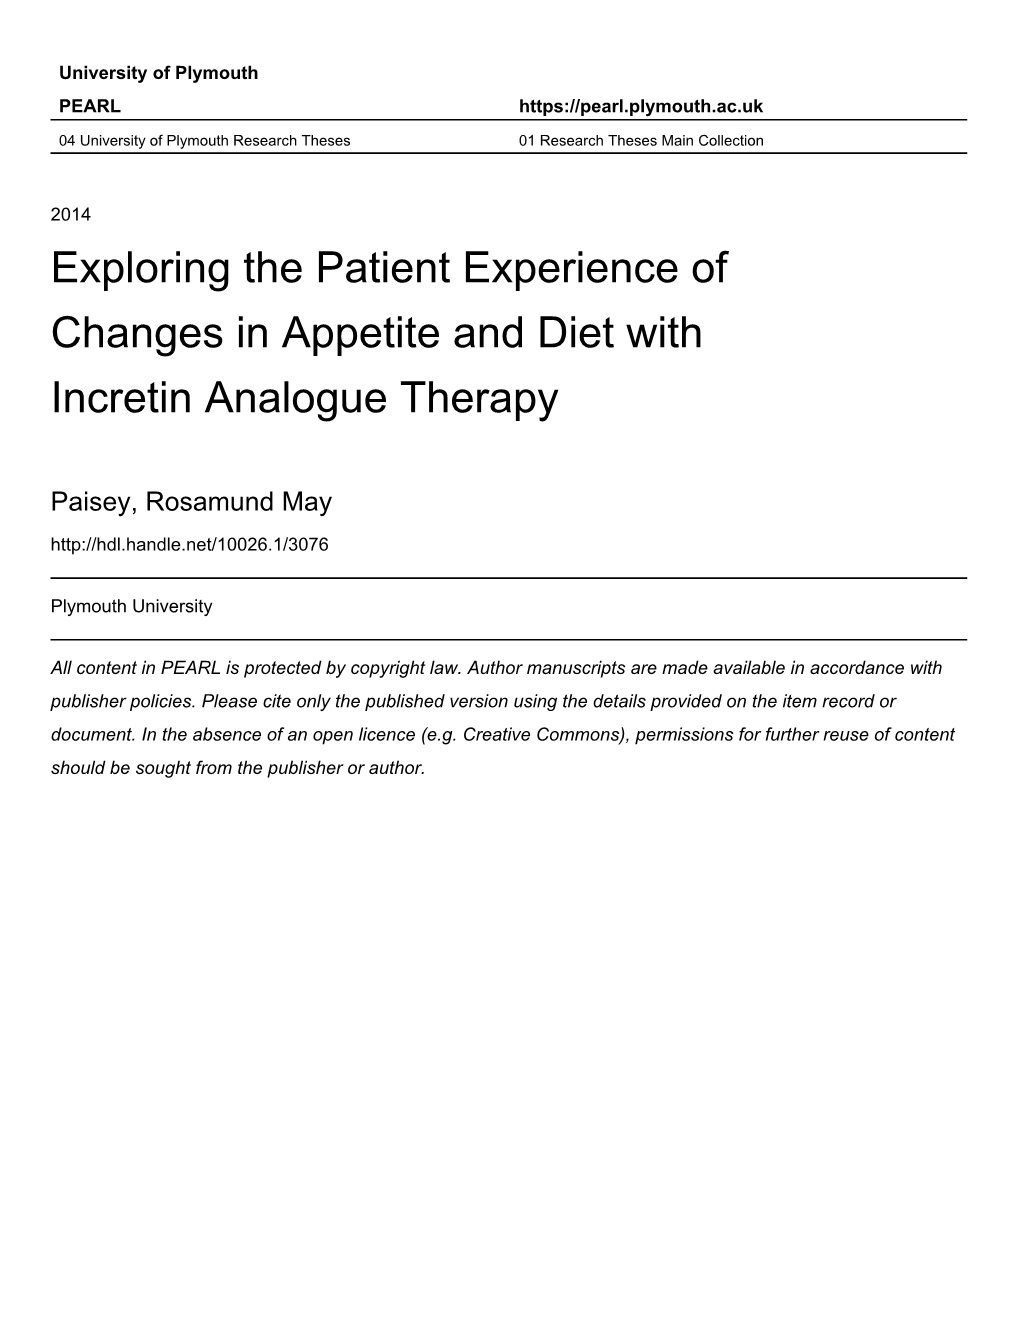 Exploring the Patient Experience of Changes in Appetite and Diet with Incretin Analogue Therapy